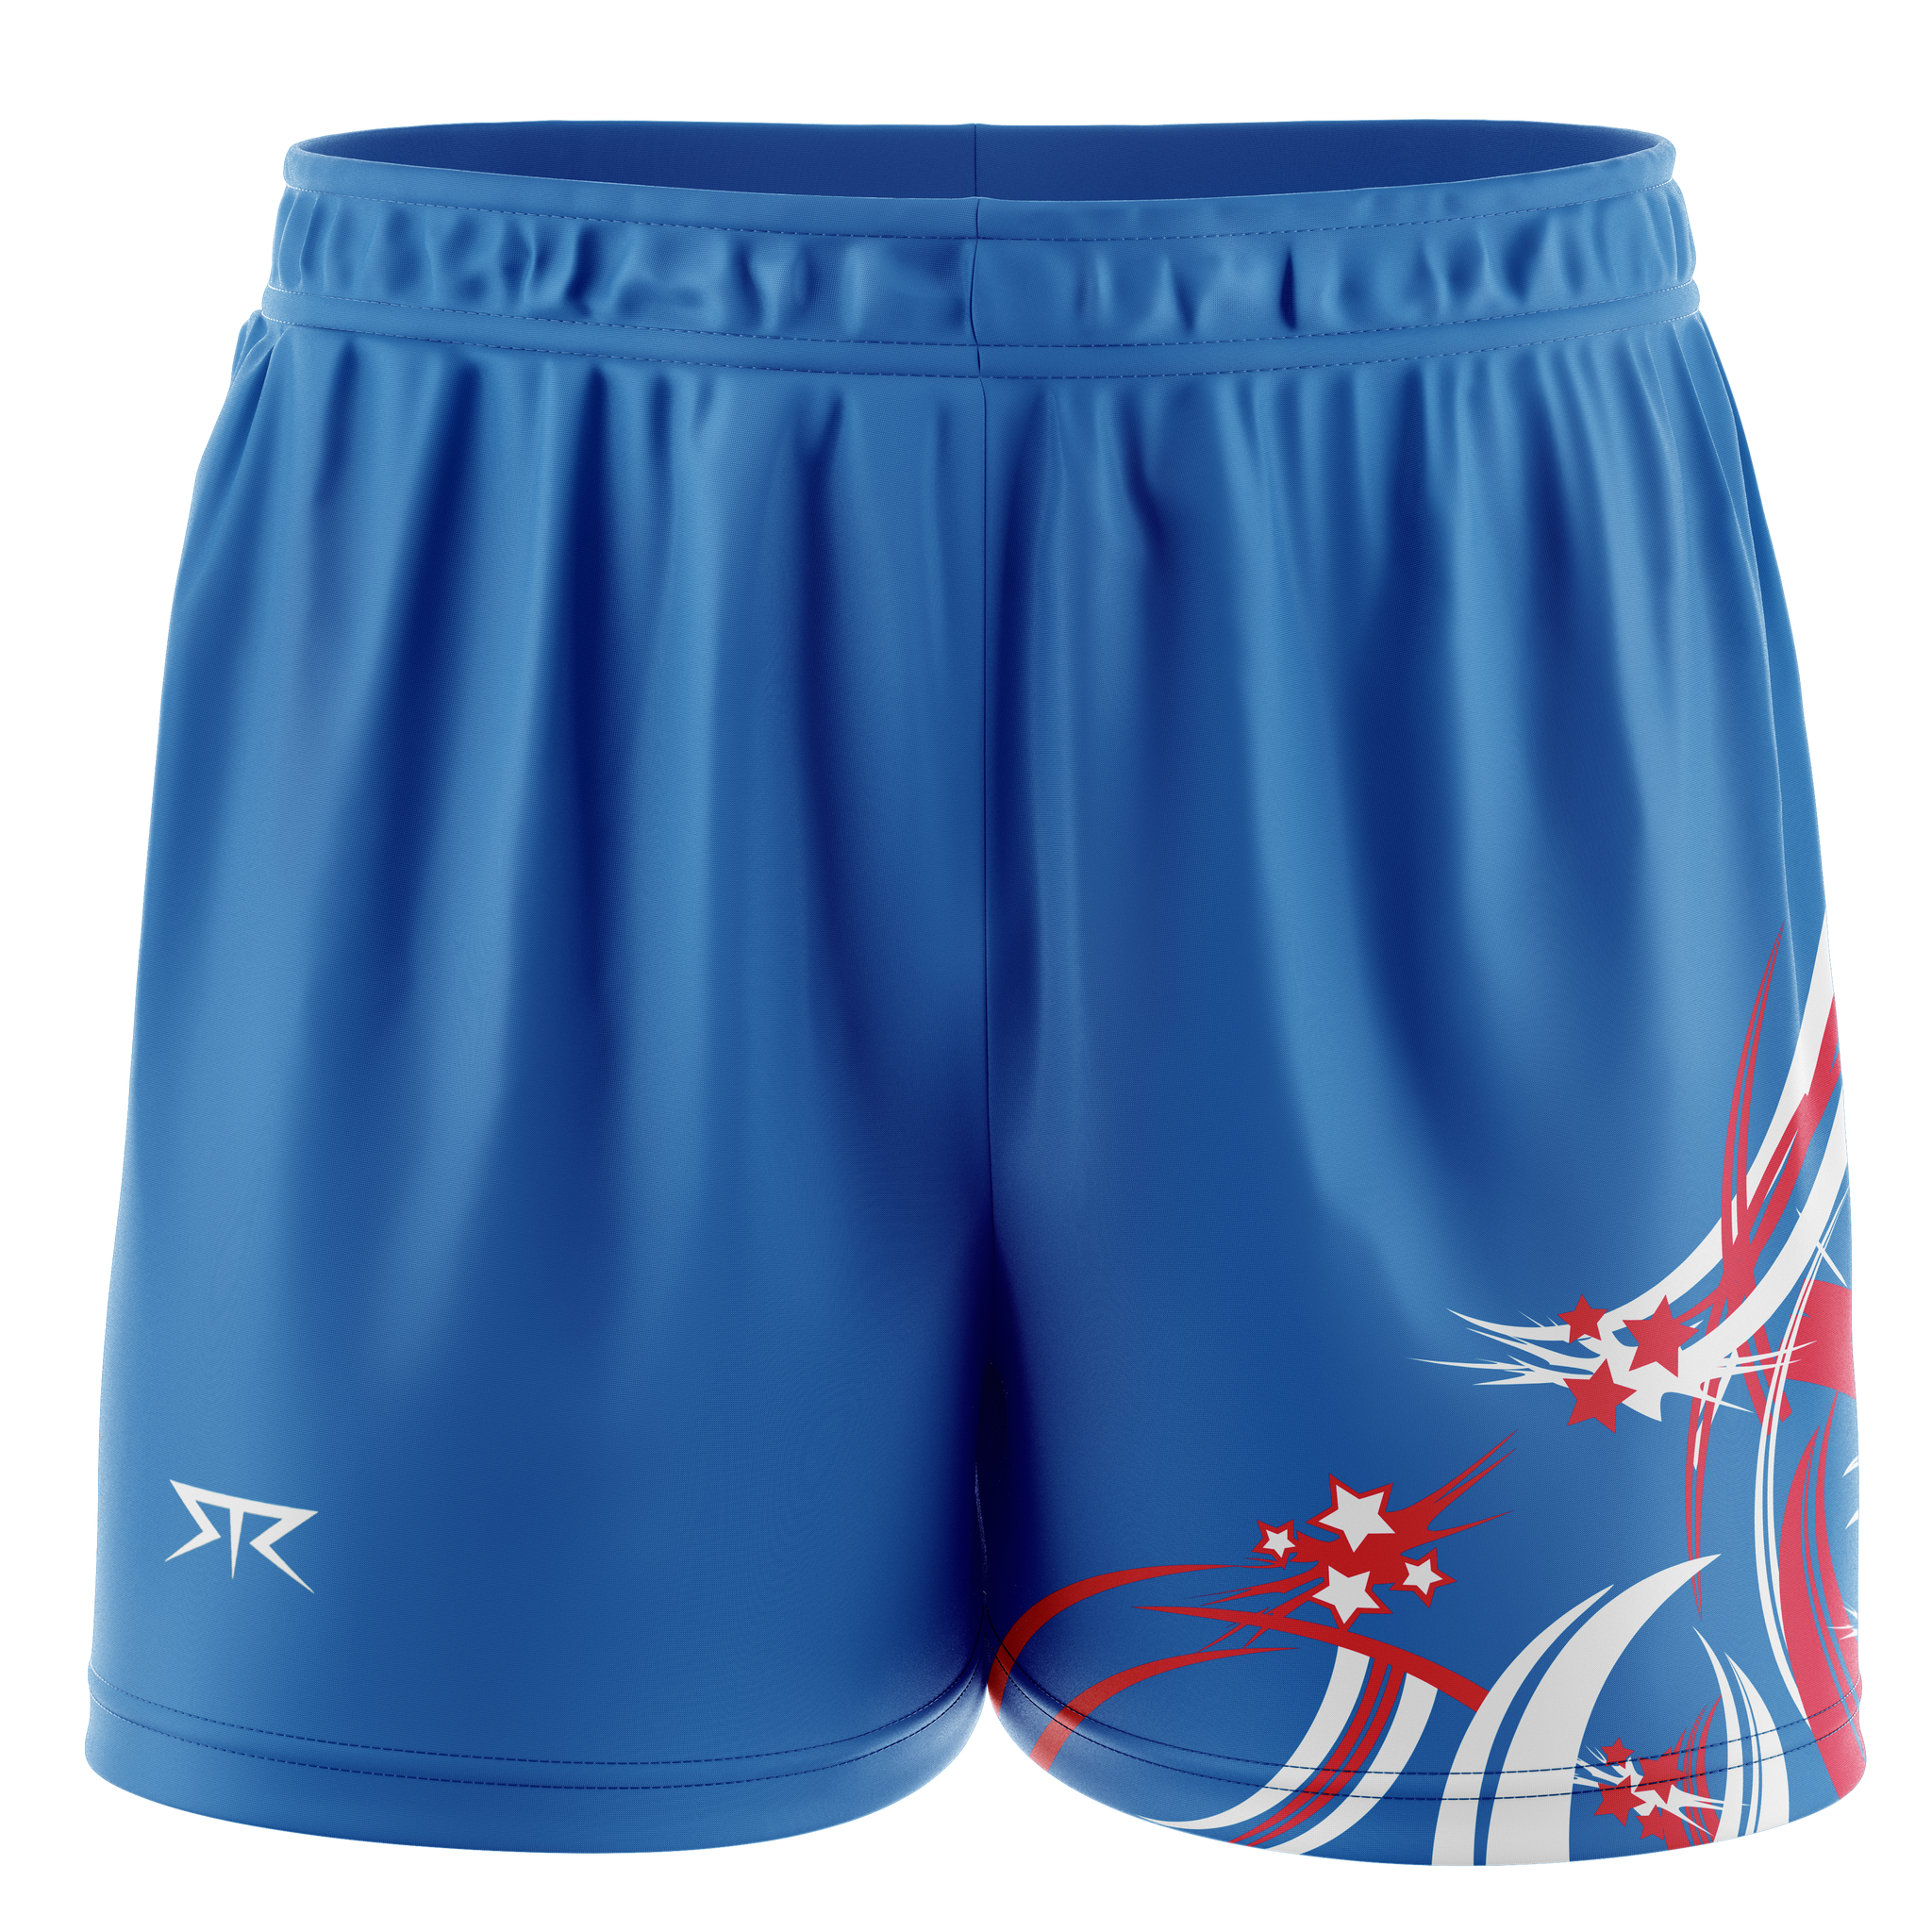 Women's AFNC Playing Shorts